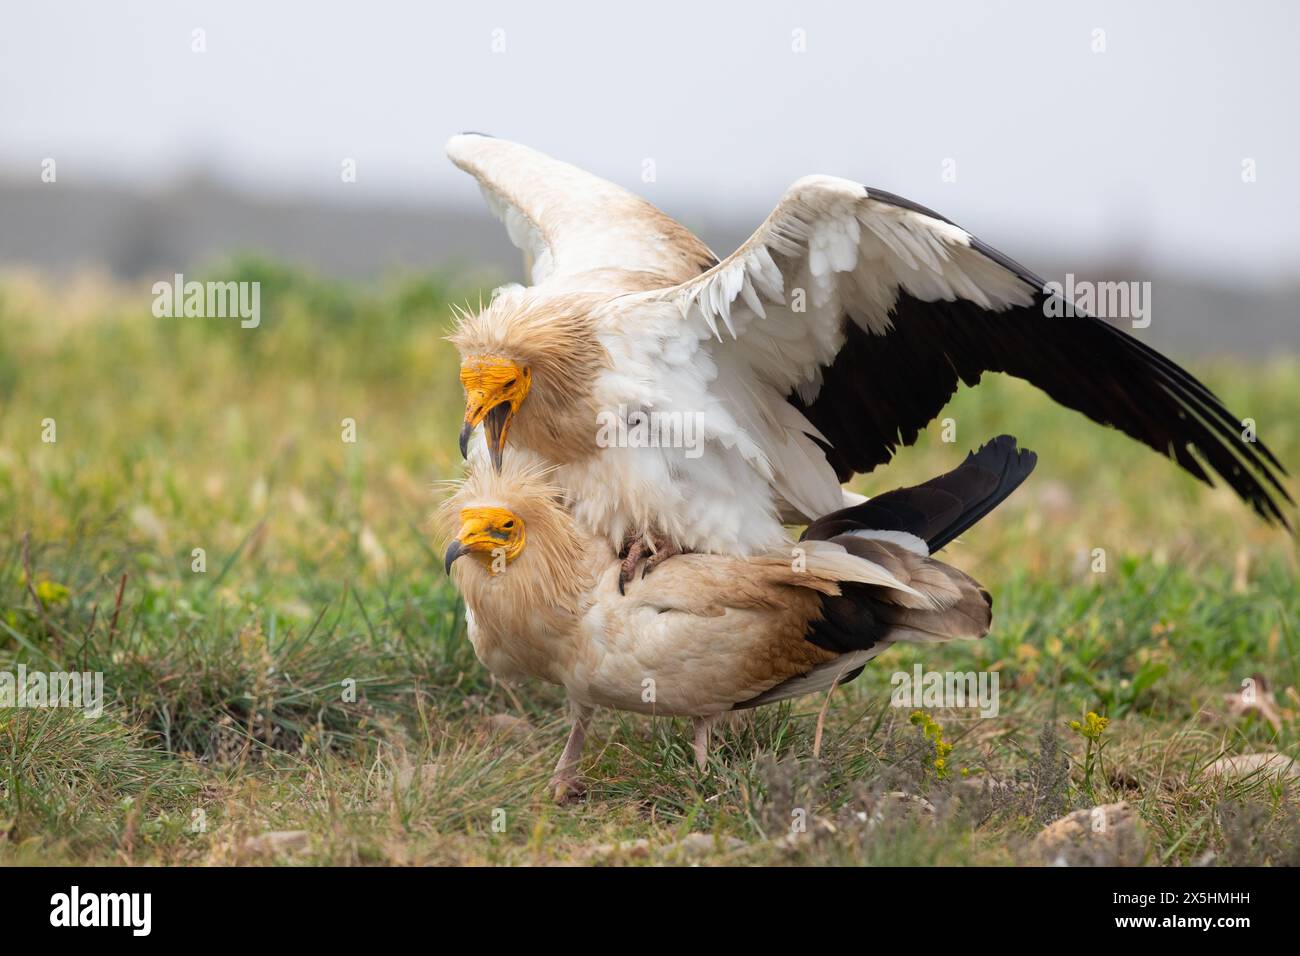 The globally endangered Egyptian vulture (Neophron percnopterus) mating. Photographed in the mountains of Catalonia, Spain. Stock Photo